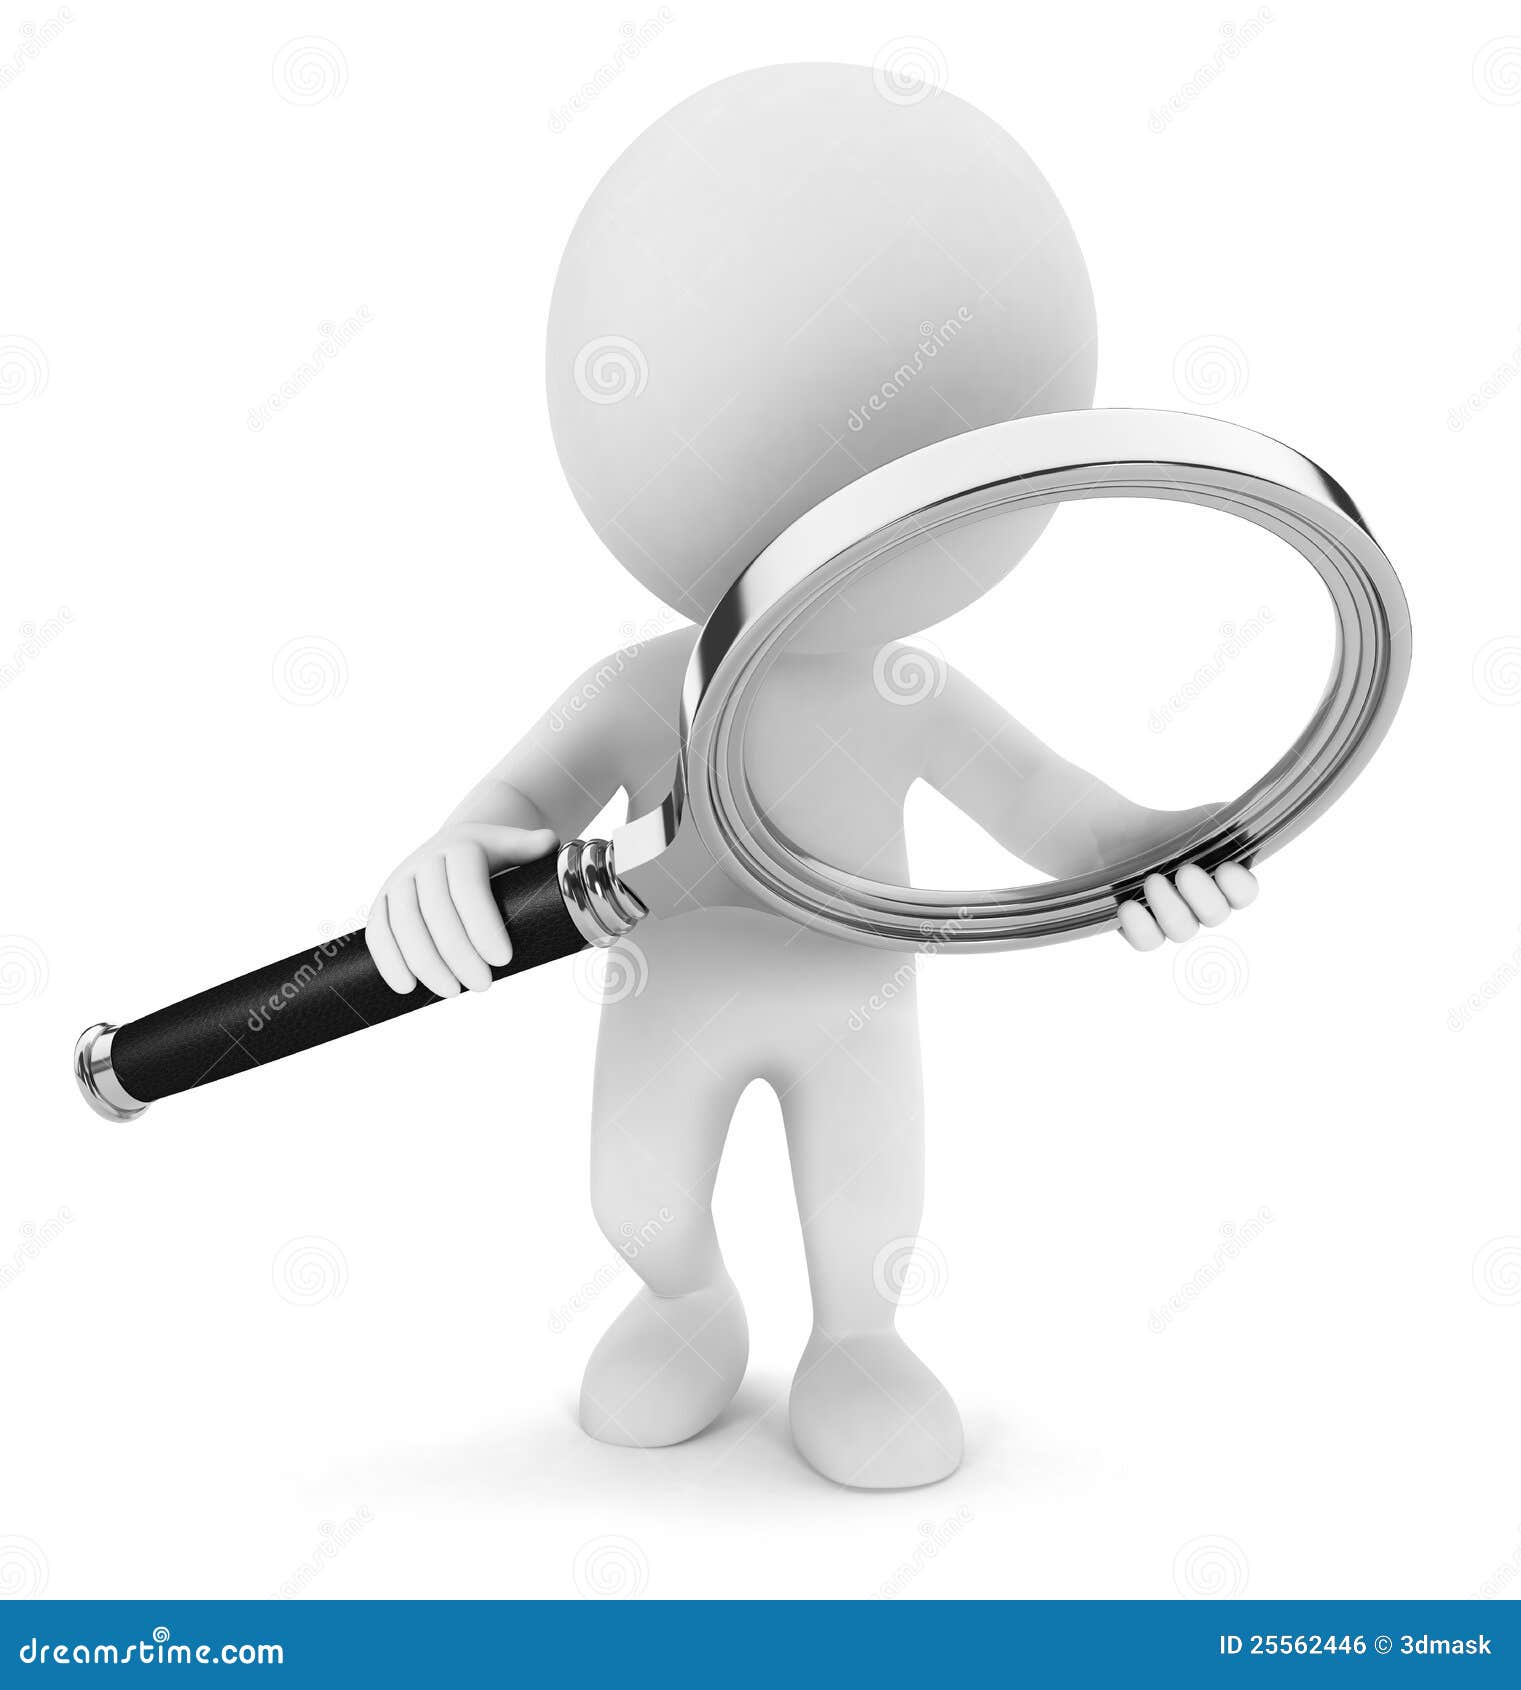 clipart man with magnifying glass - photo #11